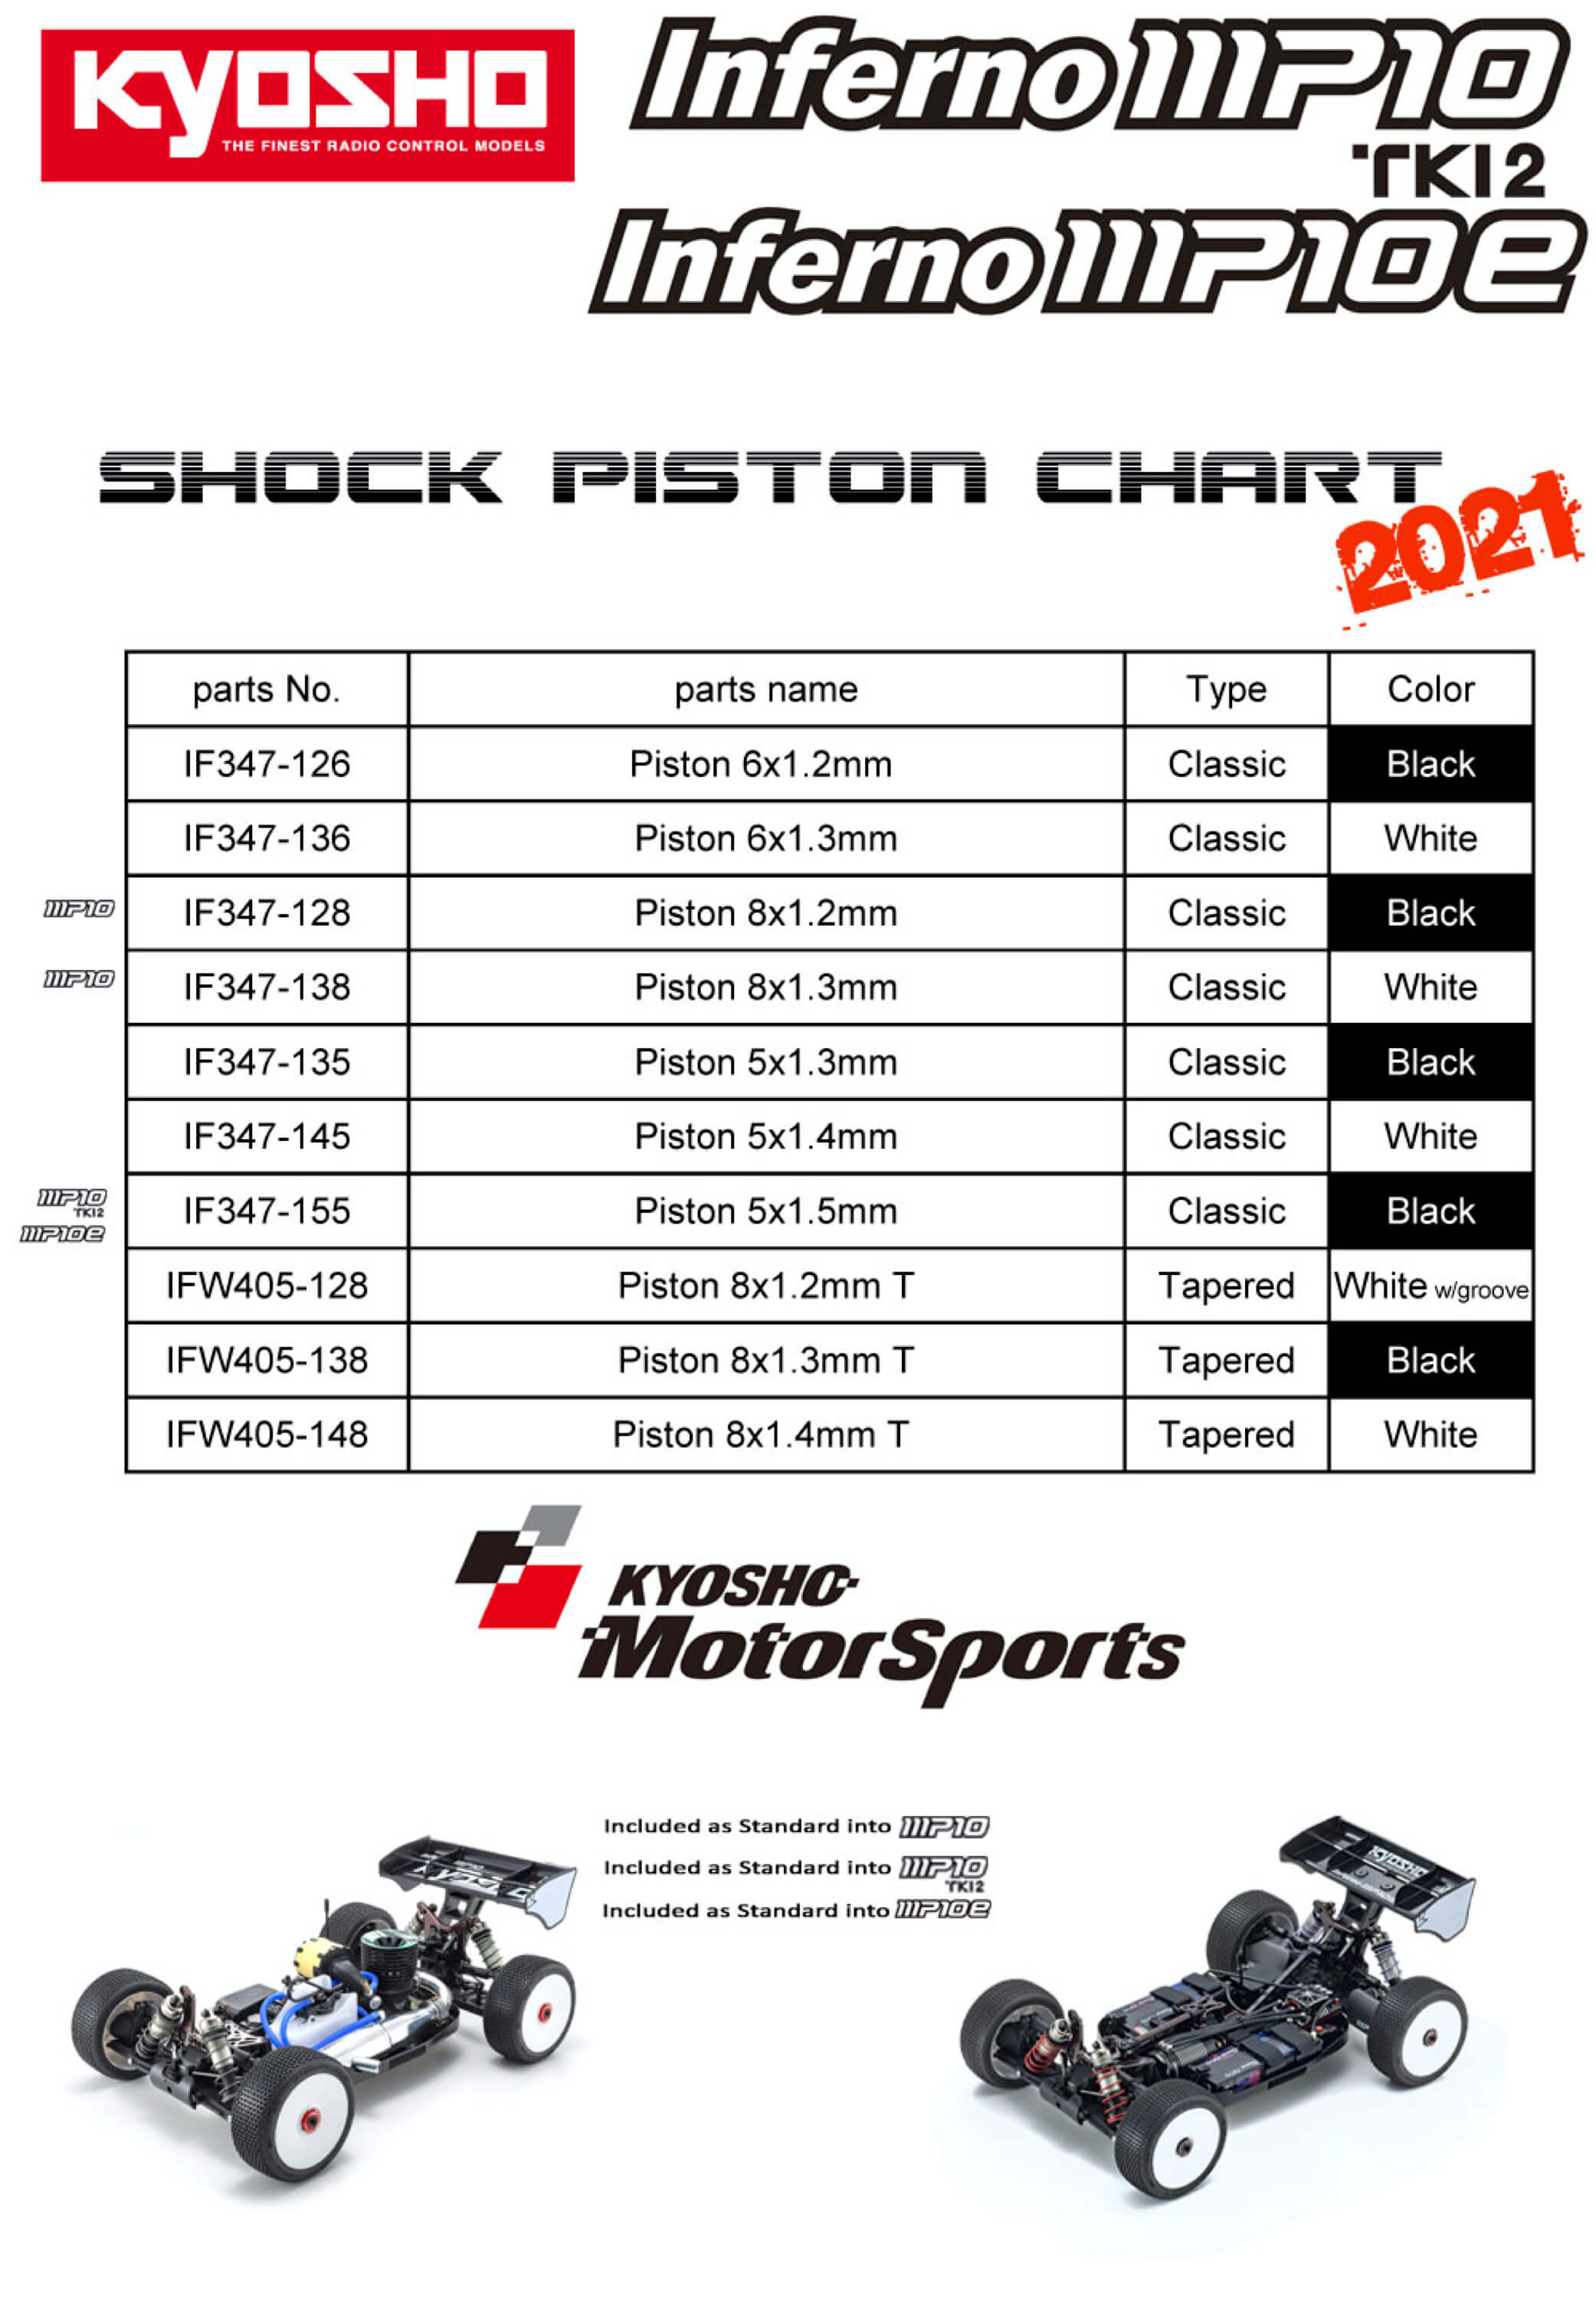 Quick tutorial 6 complete shock pistons guide for RC cars